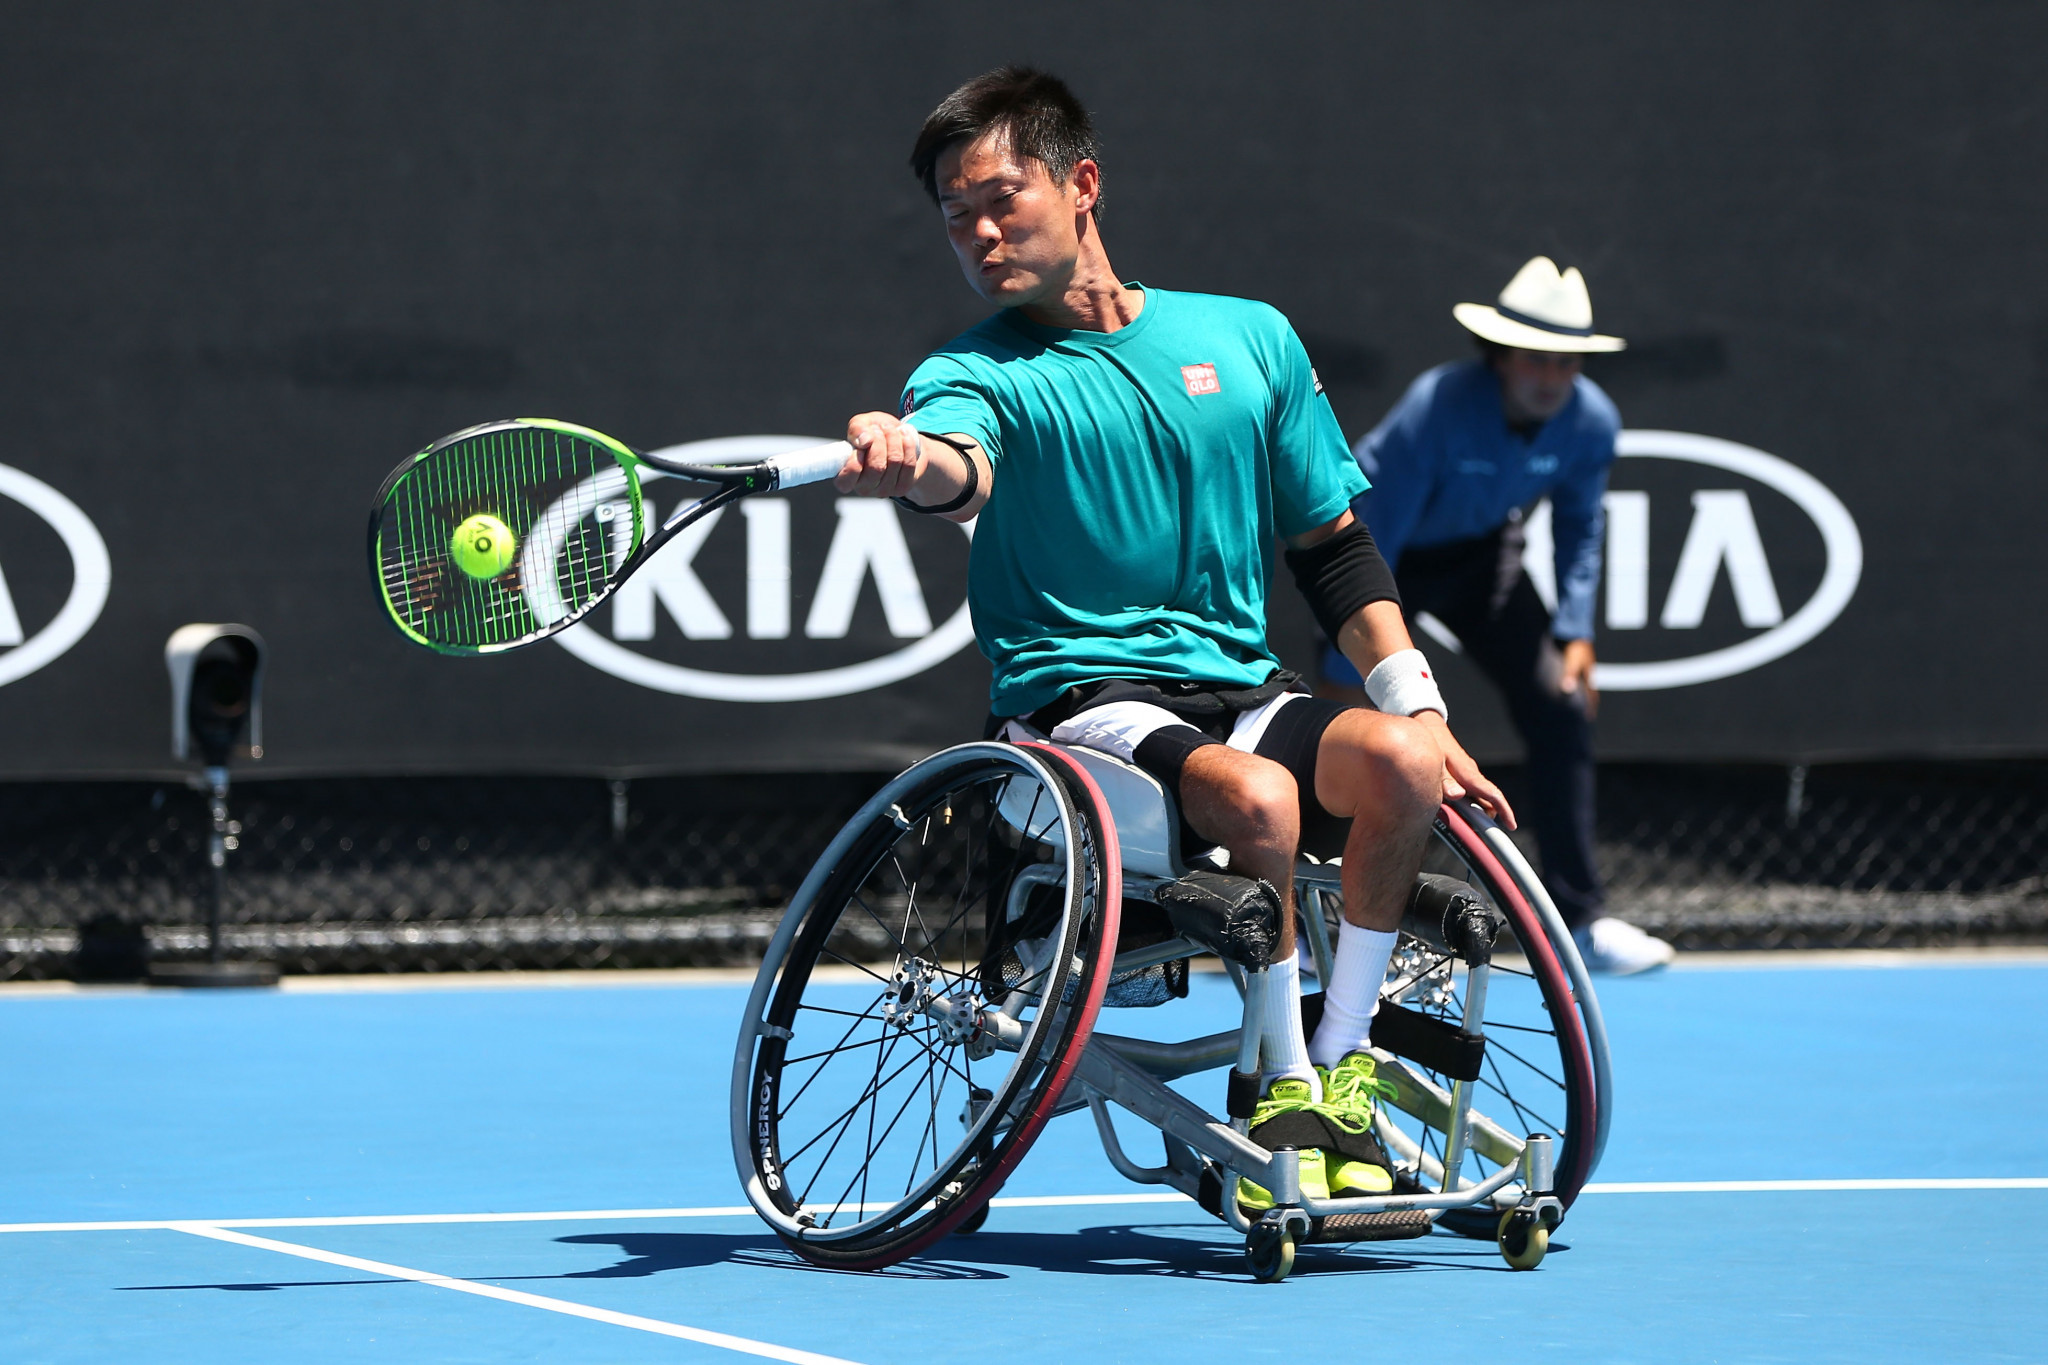 World number one Kunieda aiming to continue good form at ITF Super Series event in Louisiana